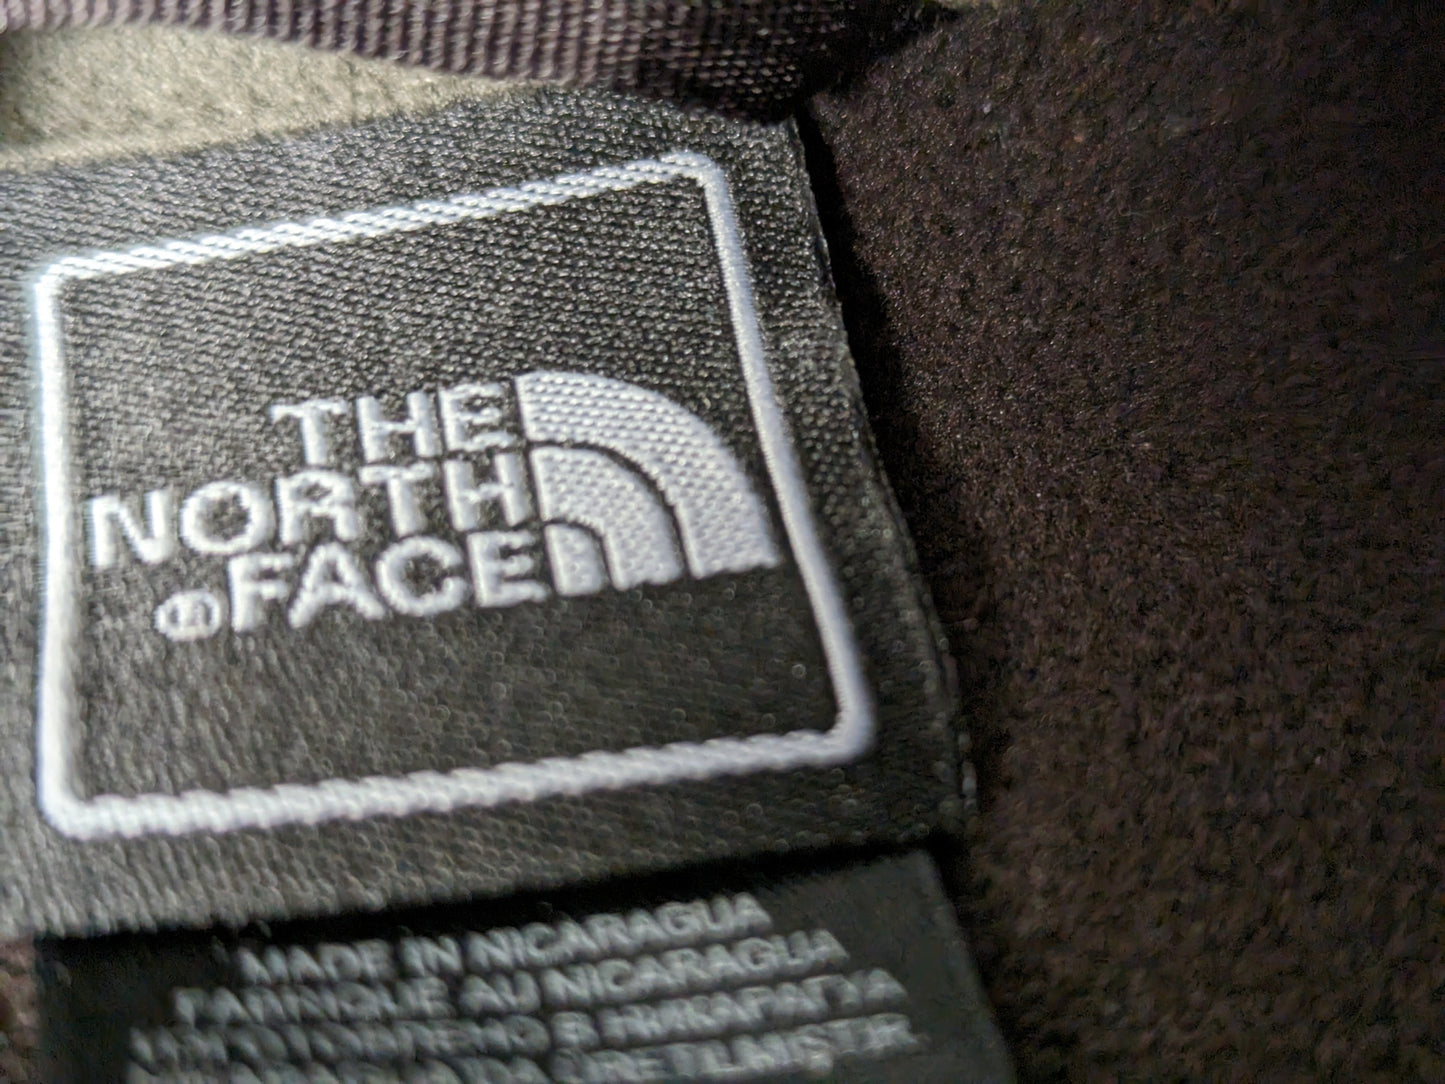 The North Face Women's Full-Zip Jacket/Coat Size Women Small Color Brown Condition Used